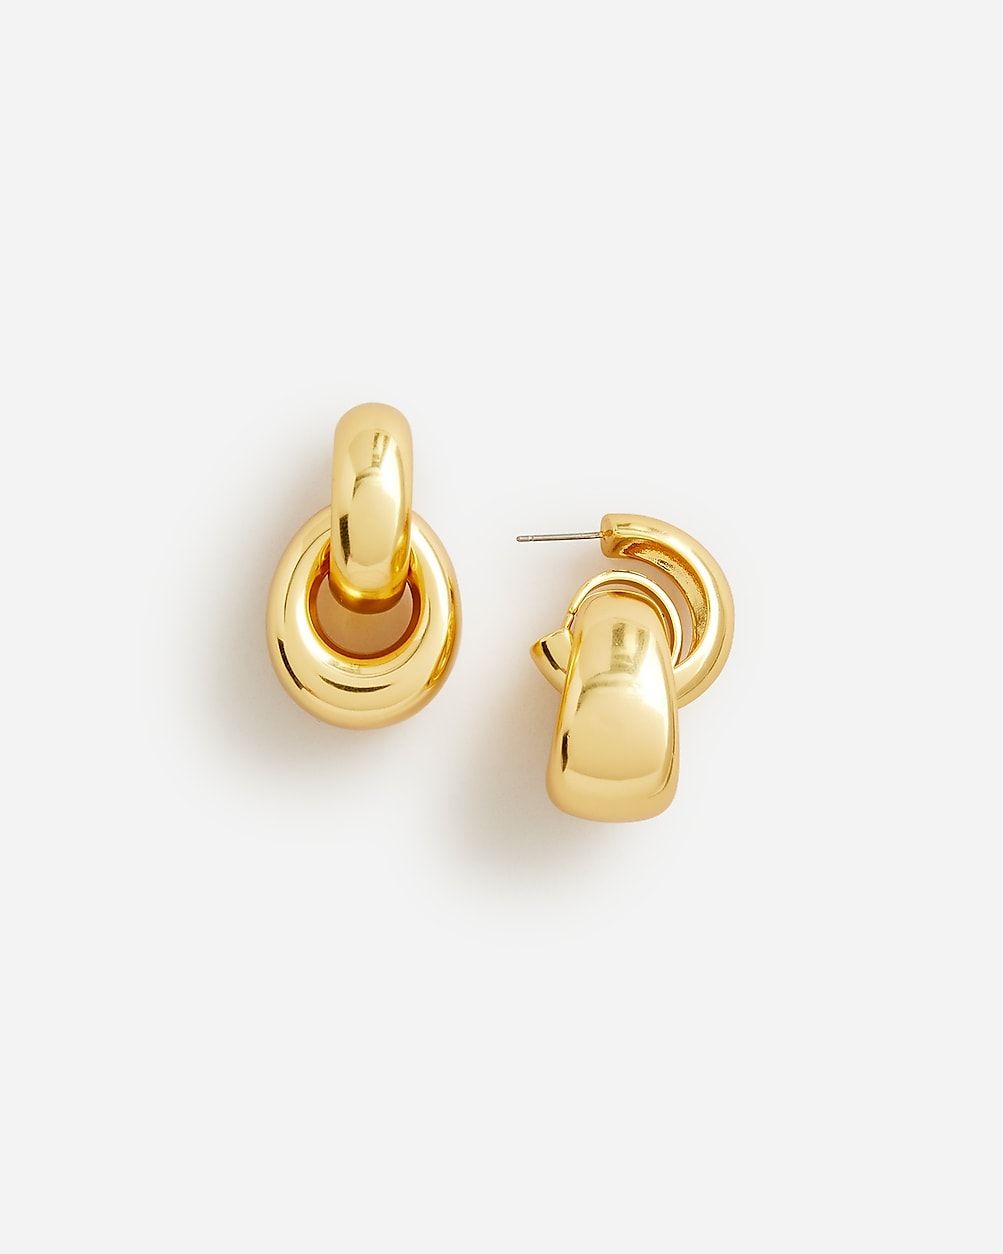 Shop this looktop ratedRounded chainlink earrings$49.50Select Colors$44.99Burnished Gold$44.99One... | J.Crew US